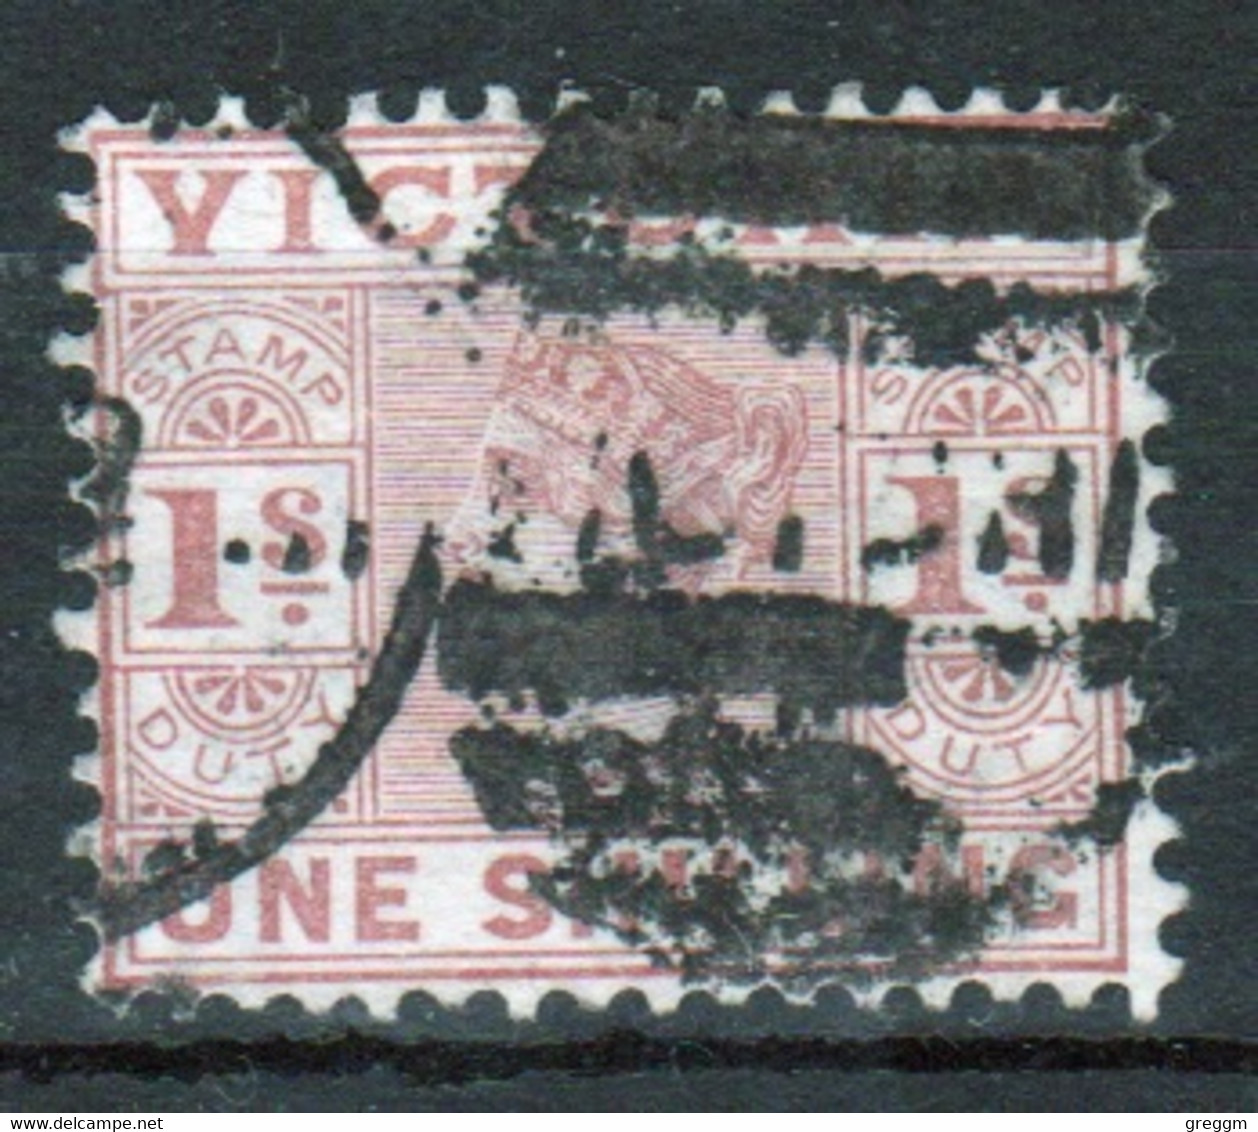 Australia 1886 Queen Victoria One Shilling Stamp Duty Revenue Fiscally Cancelled In Good Condition. - Fiscales